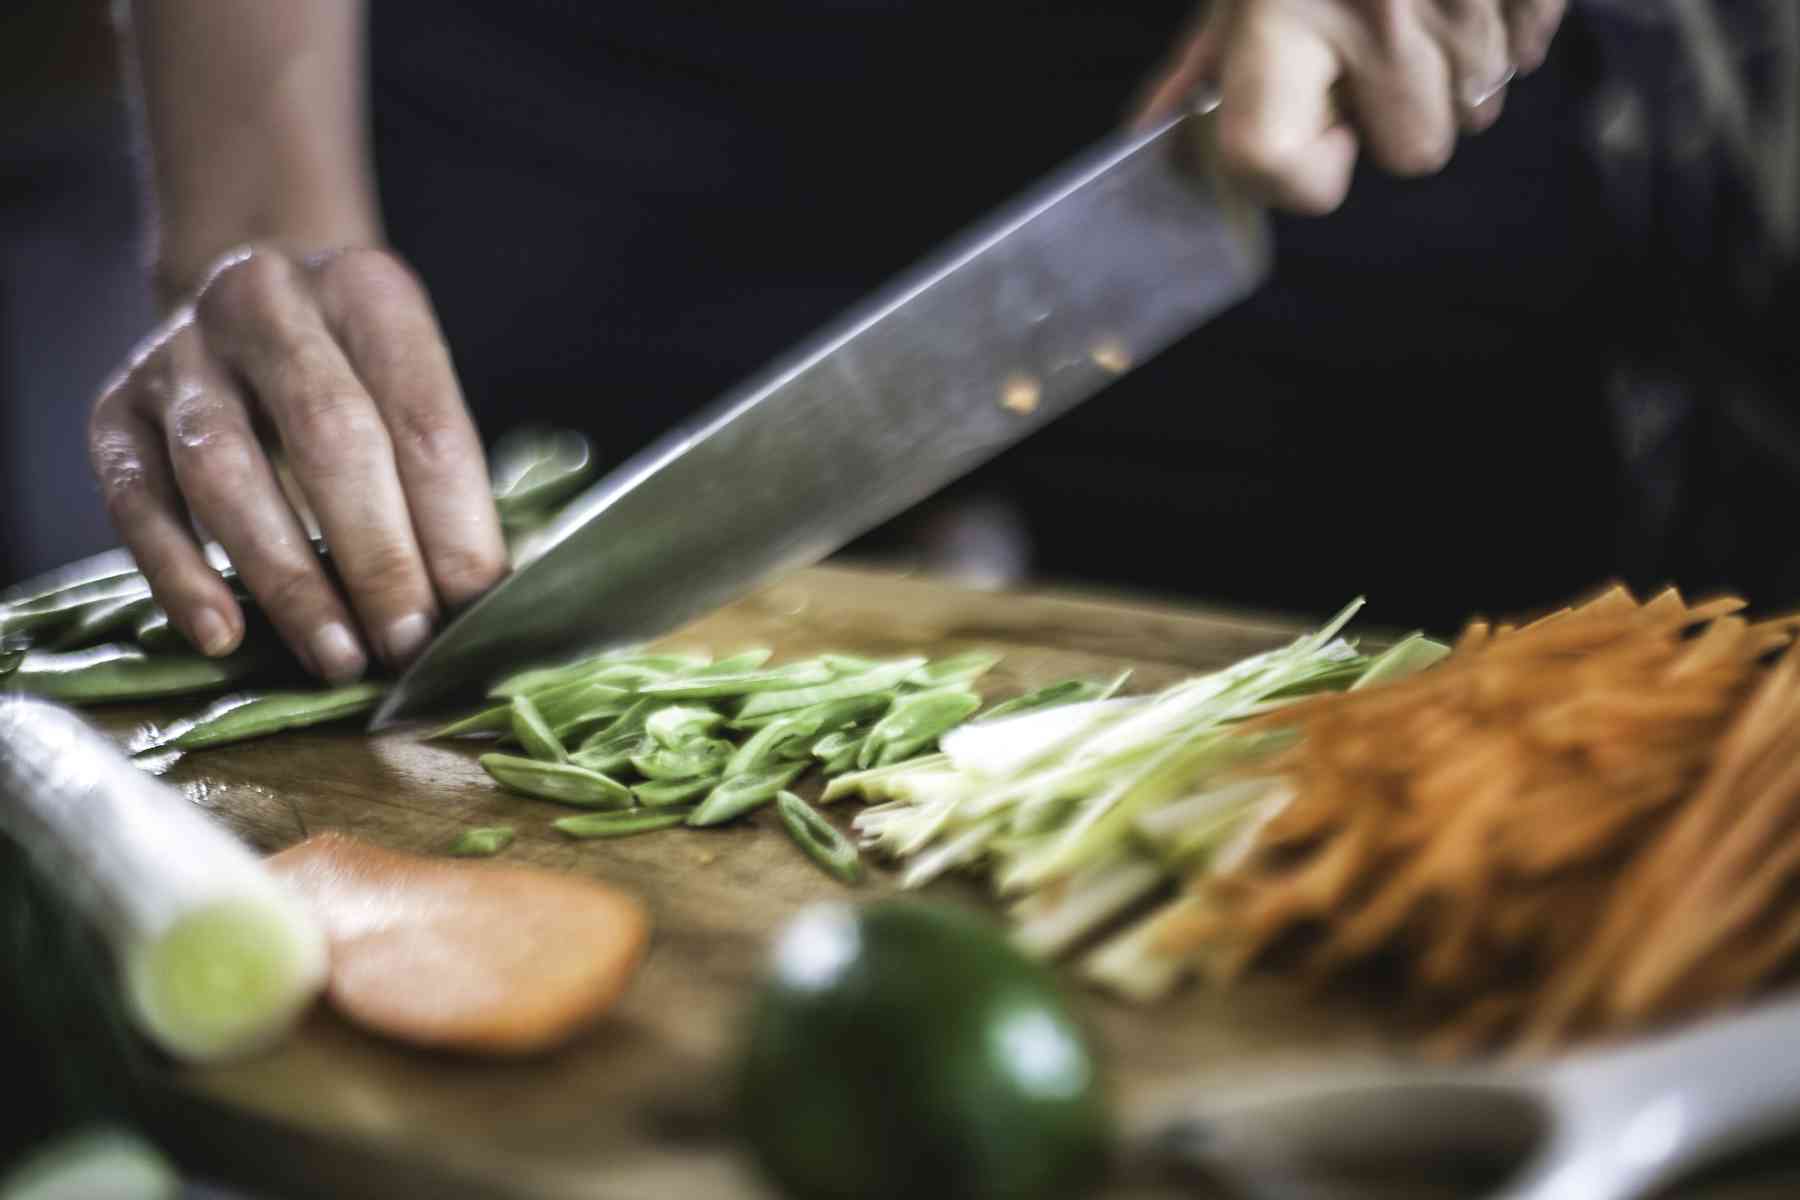 Cutting vegetables. Cook with Carving. Cook Cutting Vegetables in the Air. Slicing and dicing.